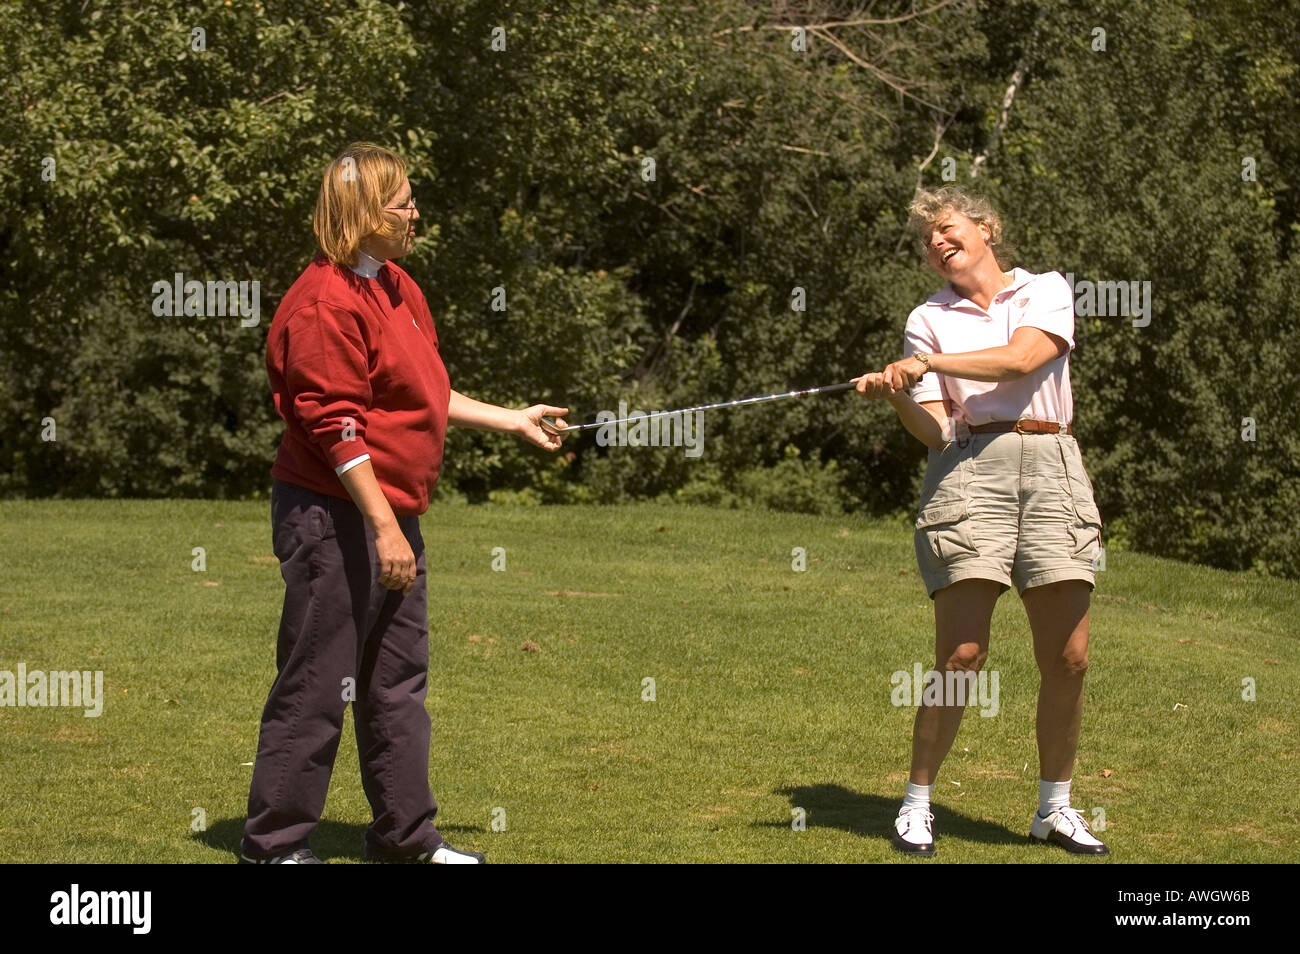 A woman laughs while getting a lesson from her golf professional. Stock Photo